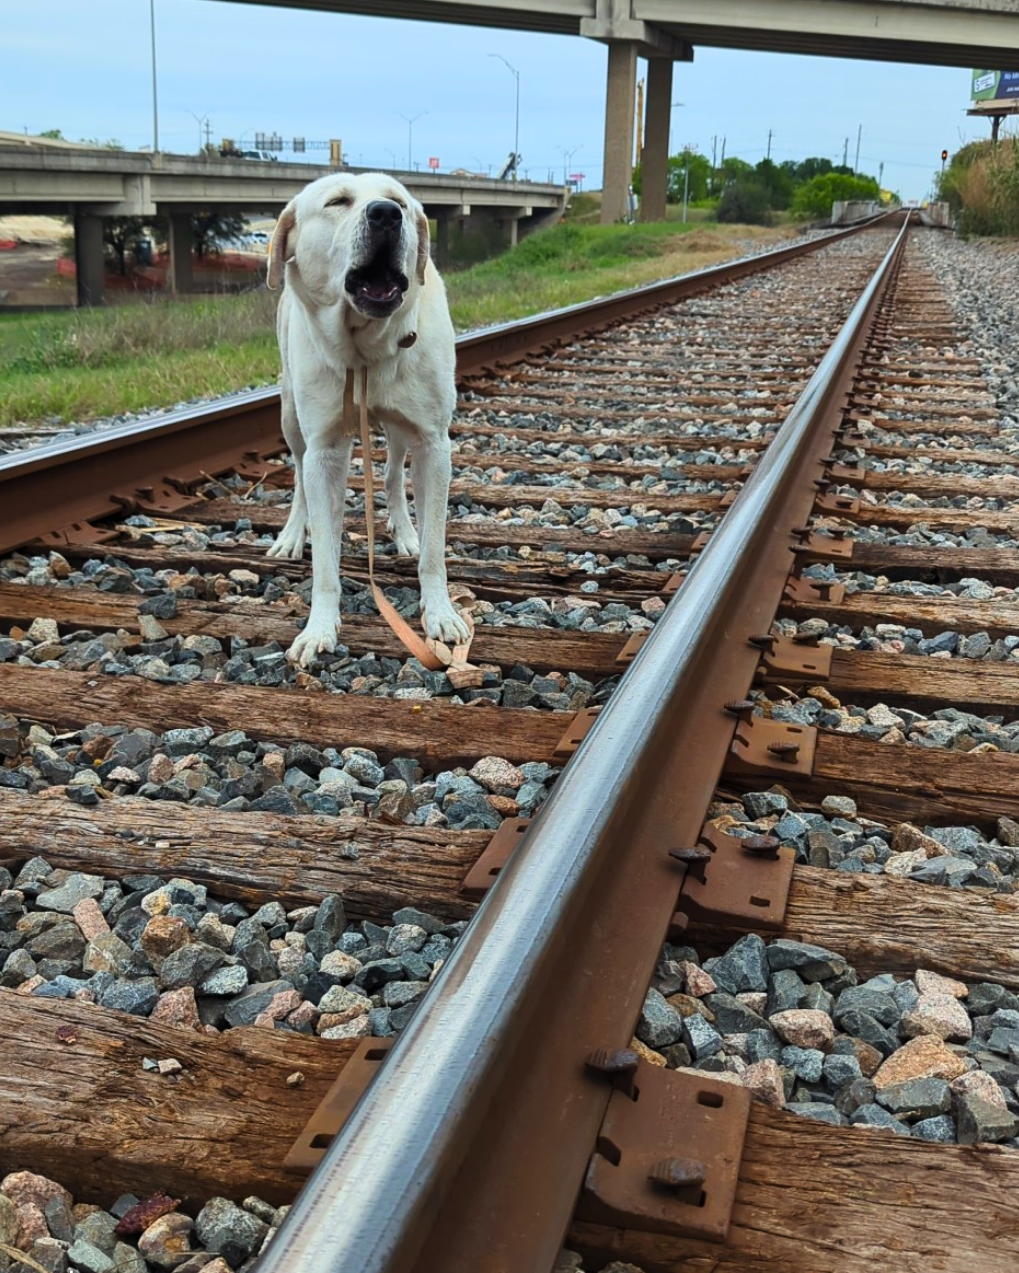 Lucky the dog trapped on active train tracks.